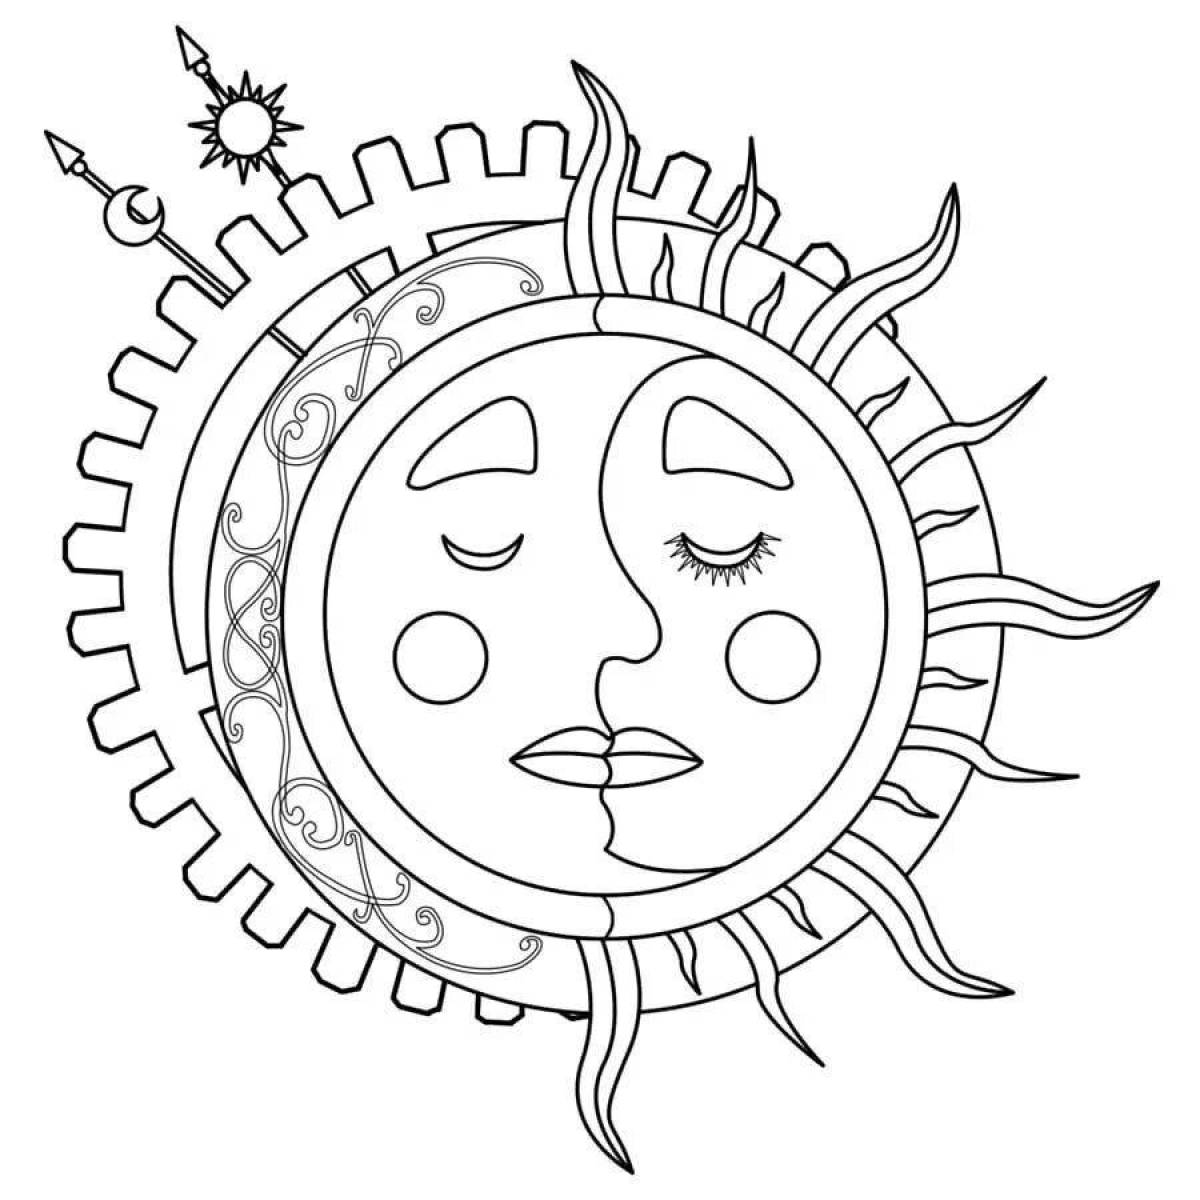 Unique sun and moon animatronics coloring book for kids